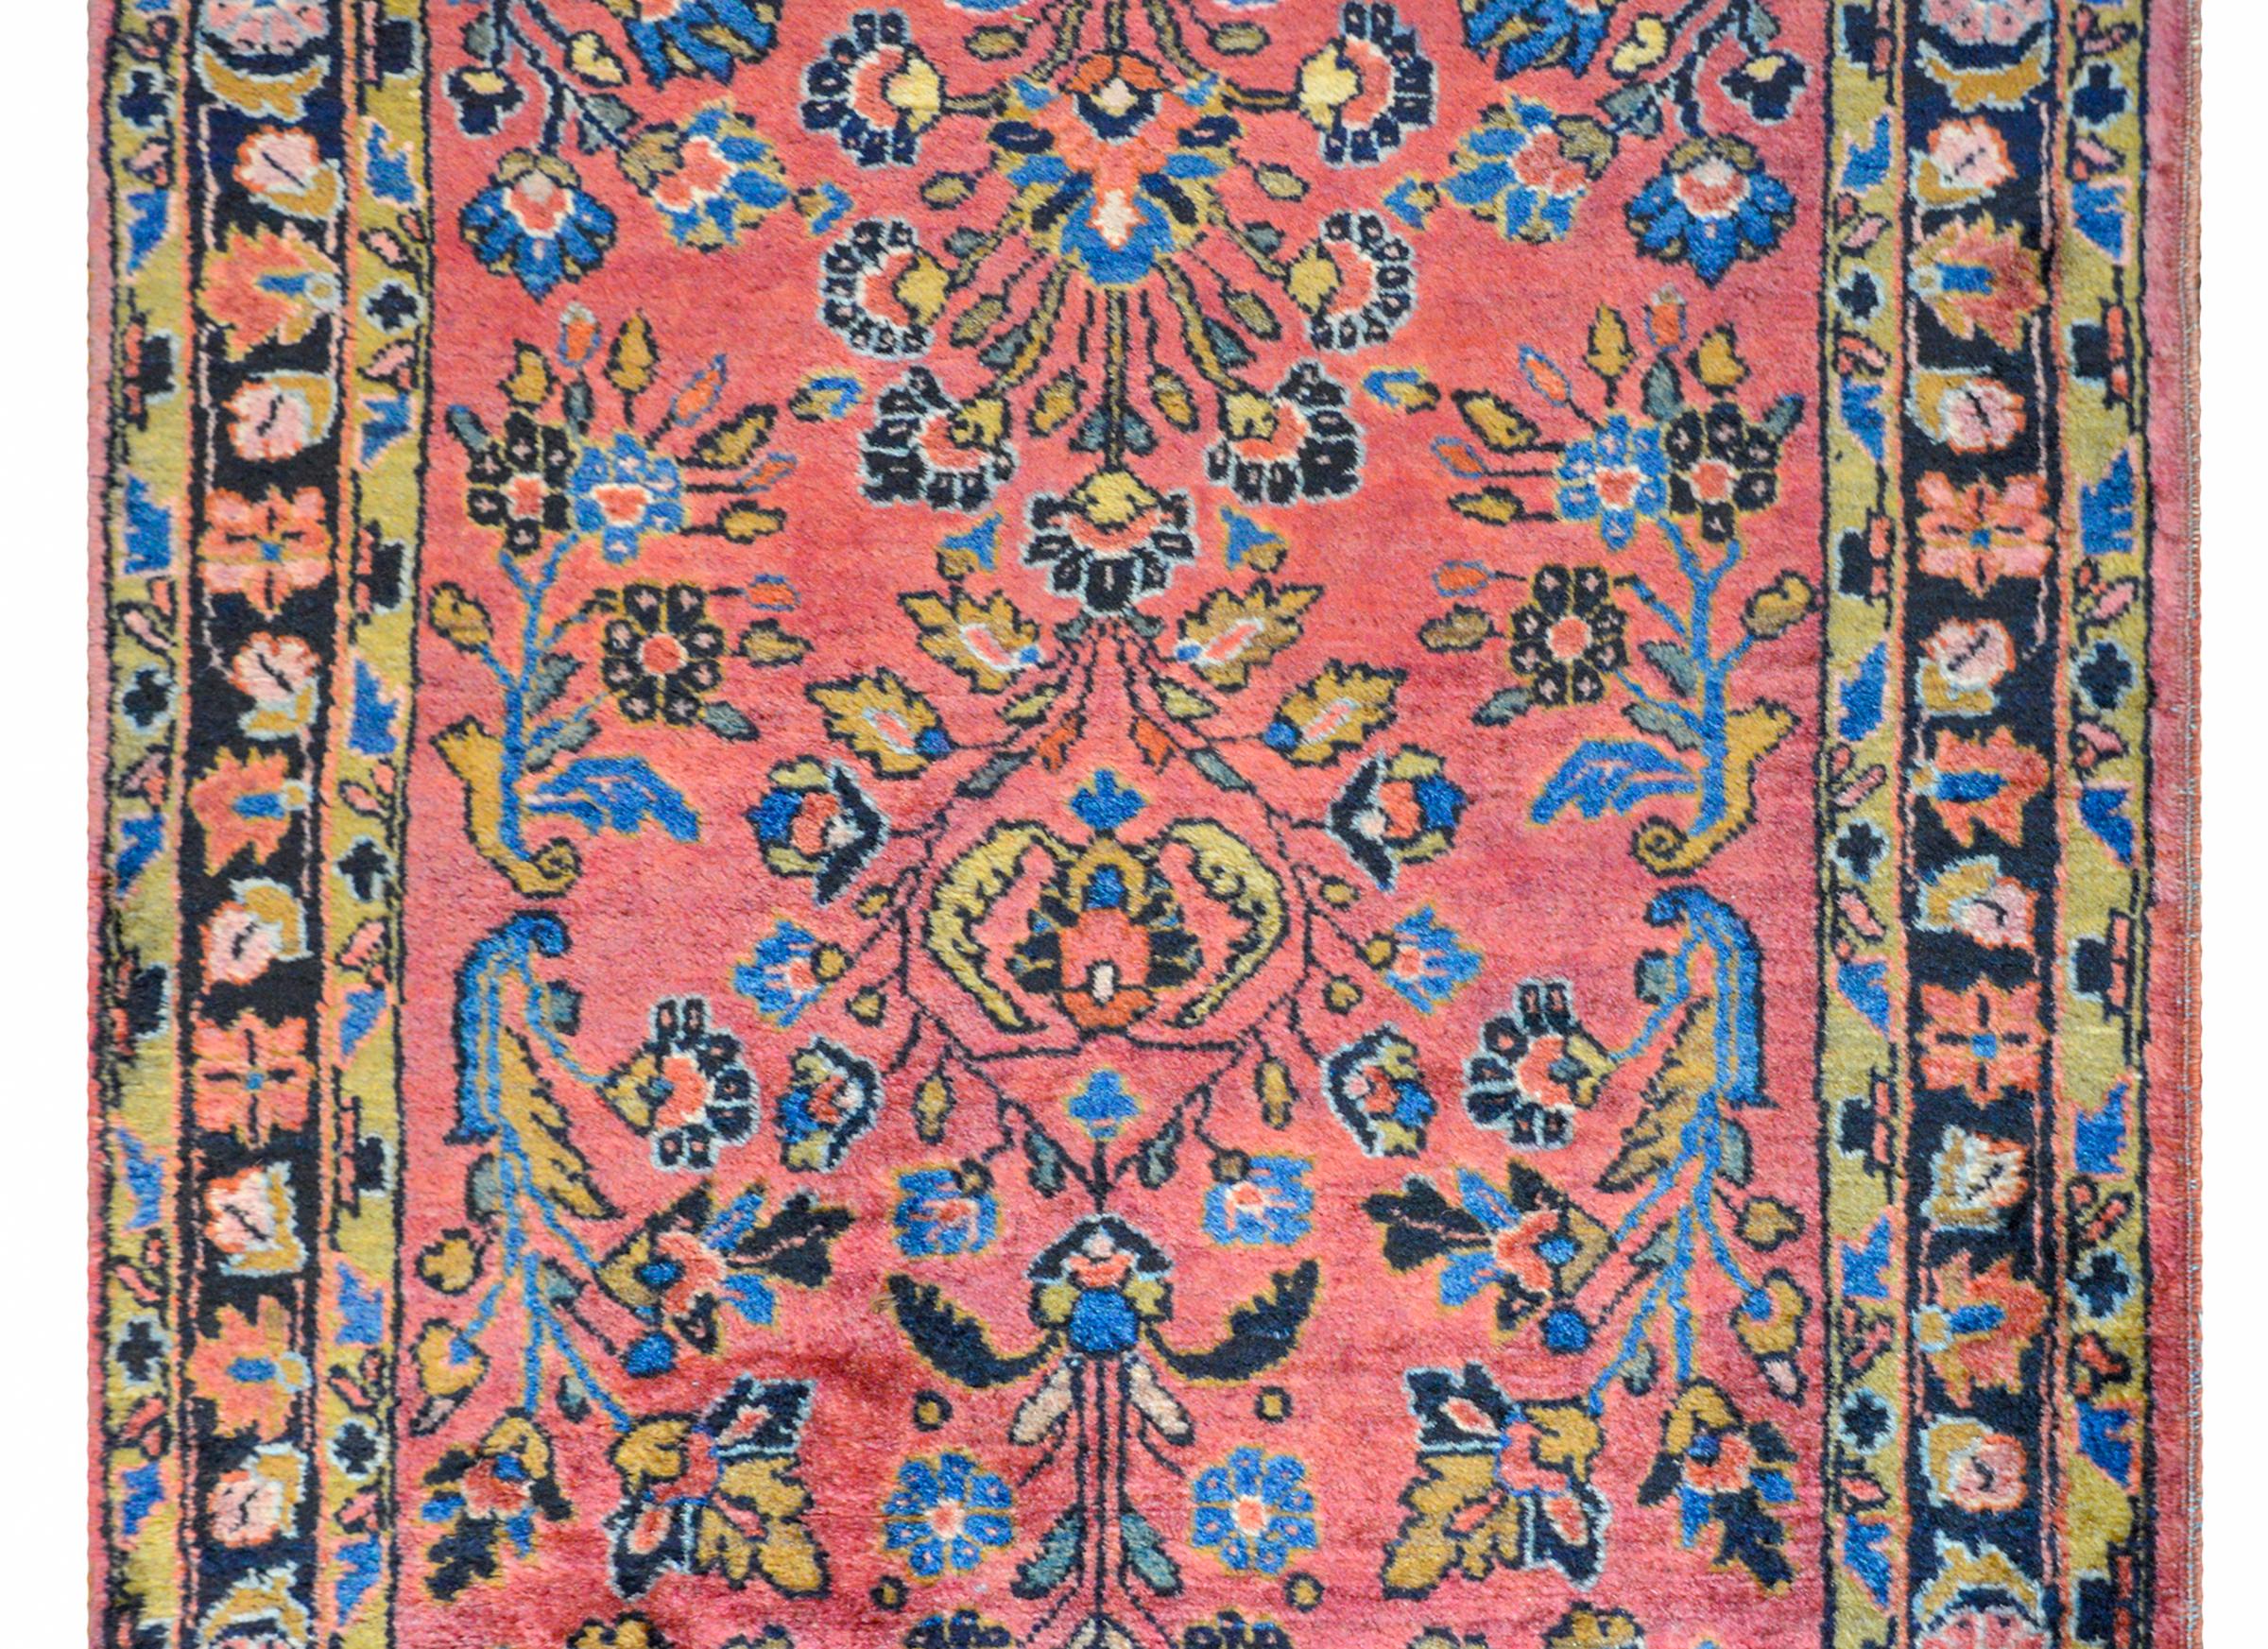 A wonderful early 20th century Persian petite Sarouk rug with a beautiful floral and scrolling vine pattern woven in light and dark indigo, gold, and coral on a pale cranberry background. The border is composed of a central floral patterned stripe